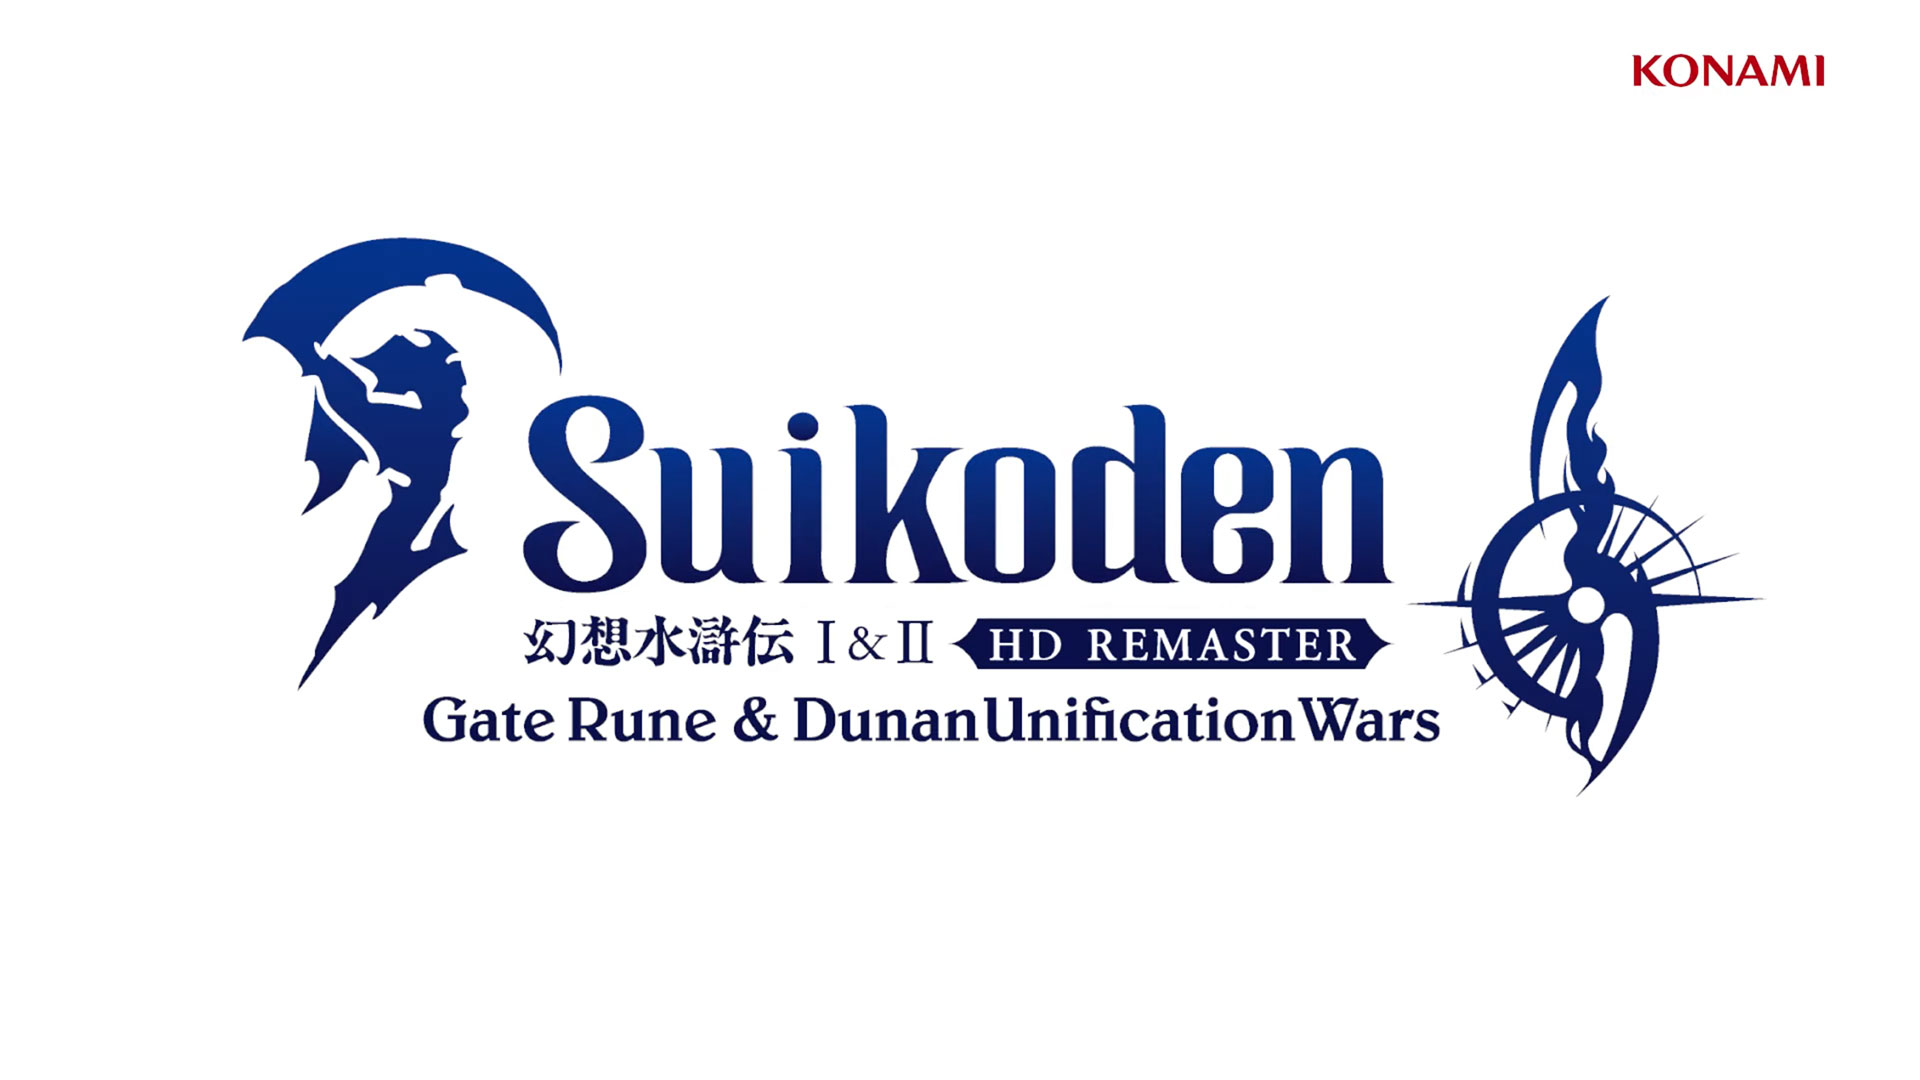 Suikoden I & II HD Remaster will no longer launch this year